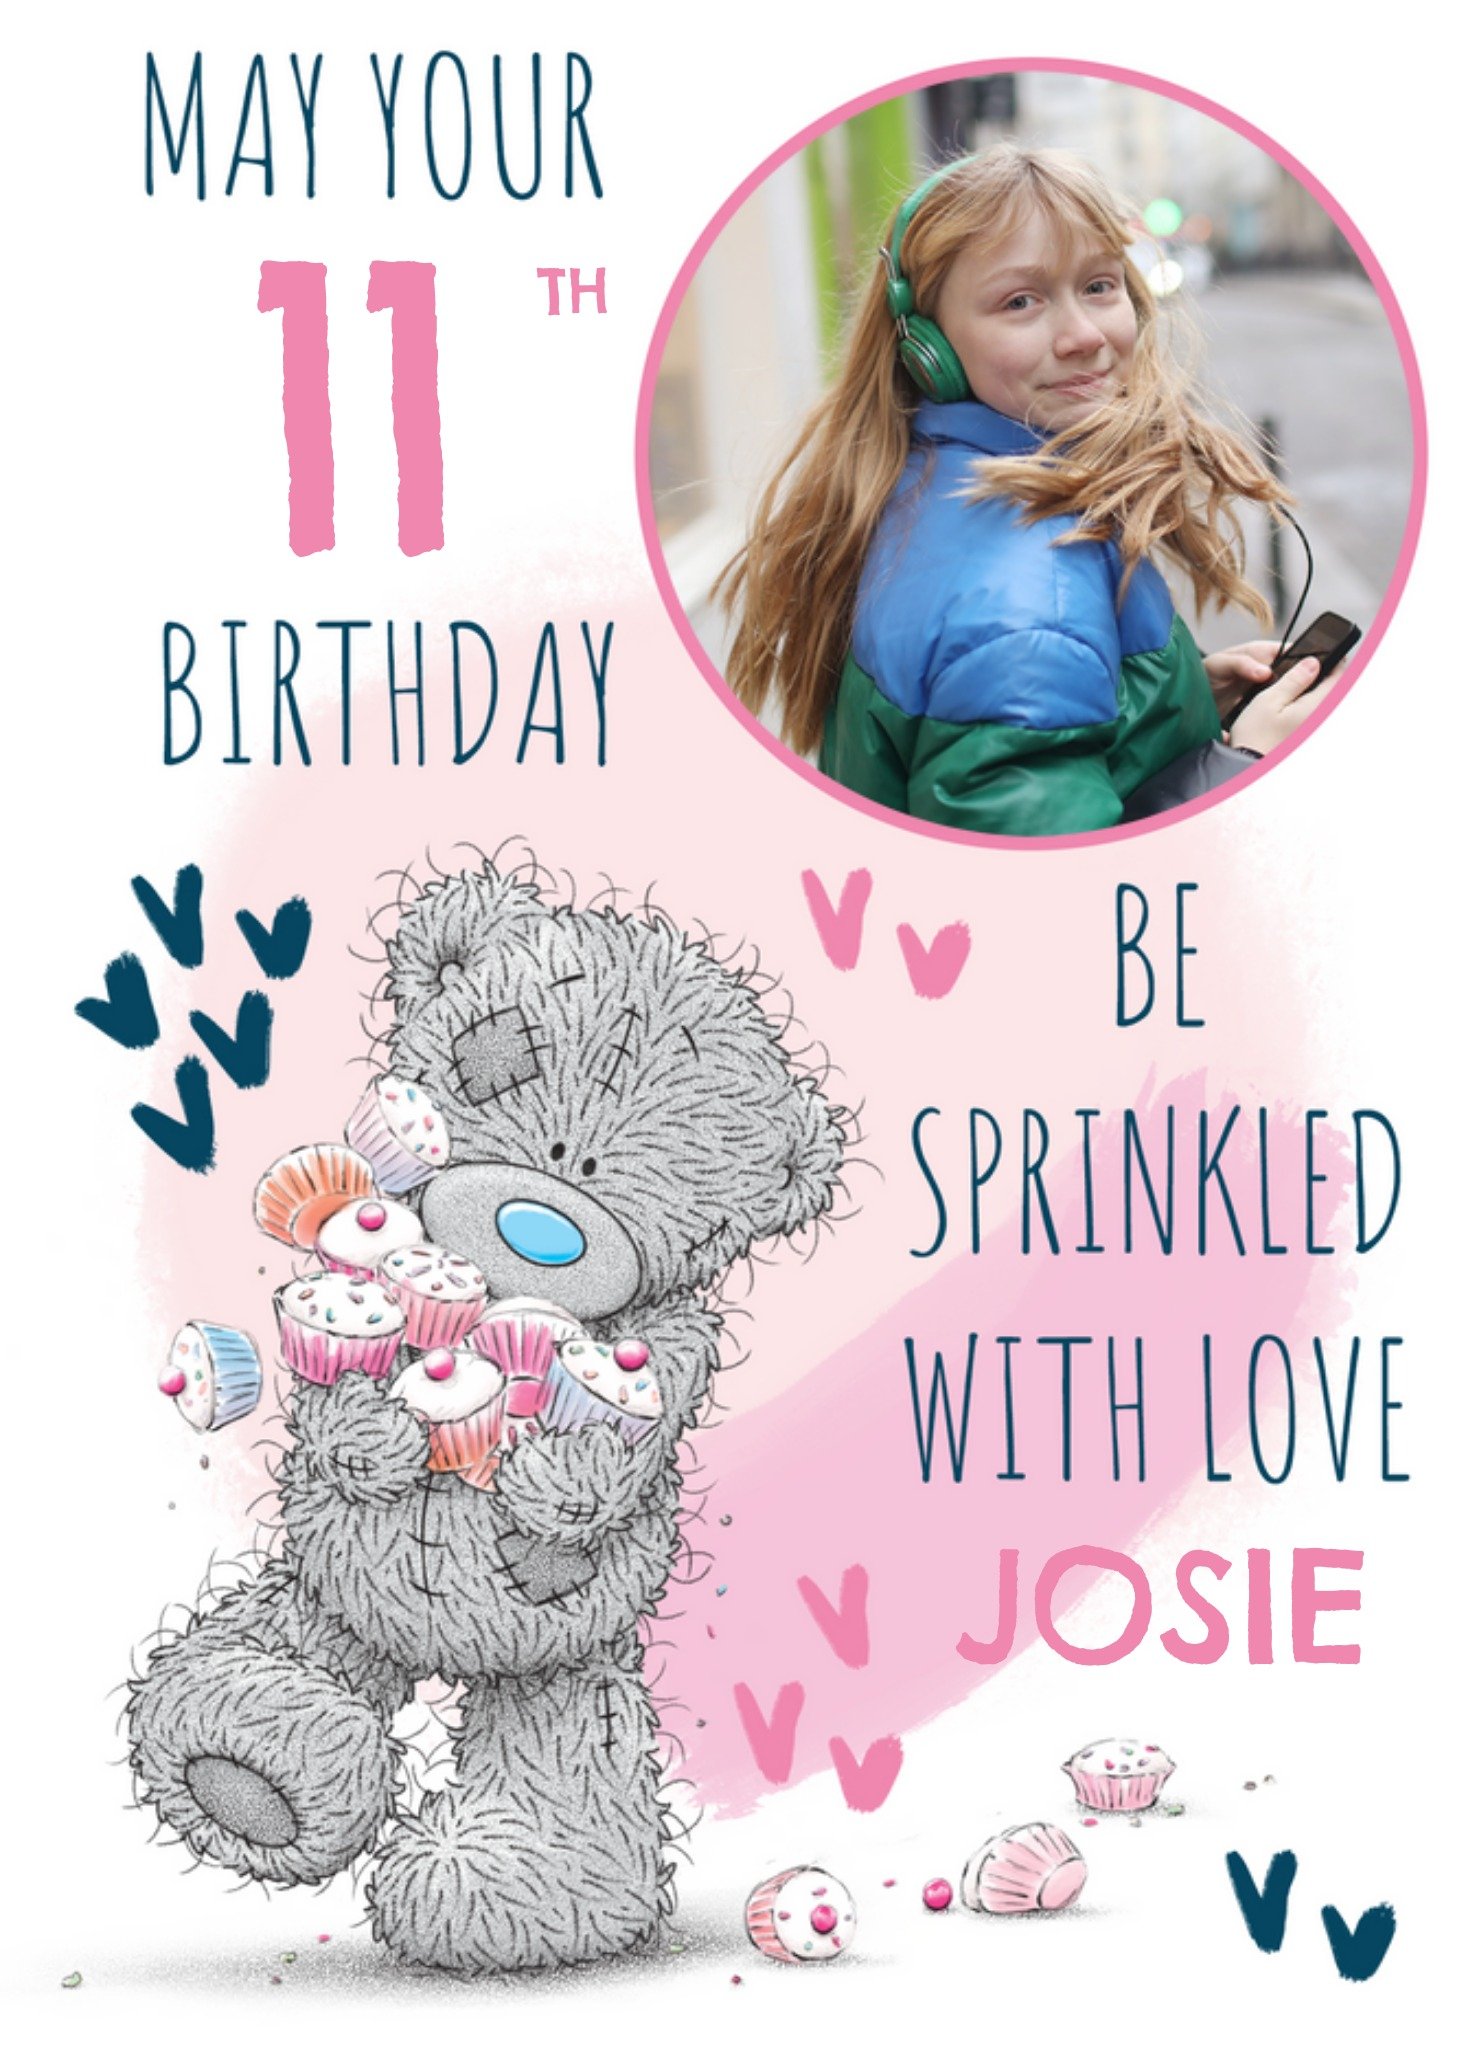 Me To You Tatty Teddy Sprinkled With Love Photo Upload Birthday Card, Large